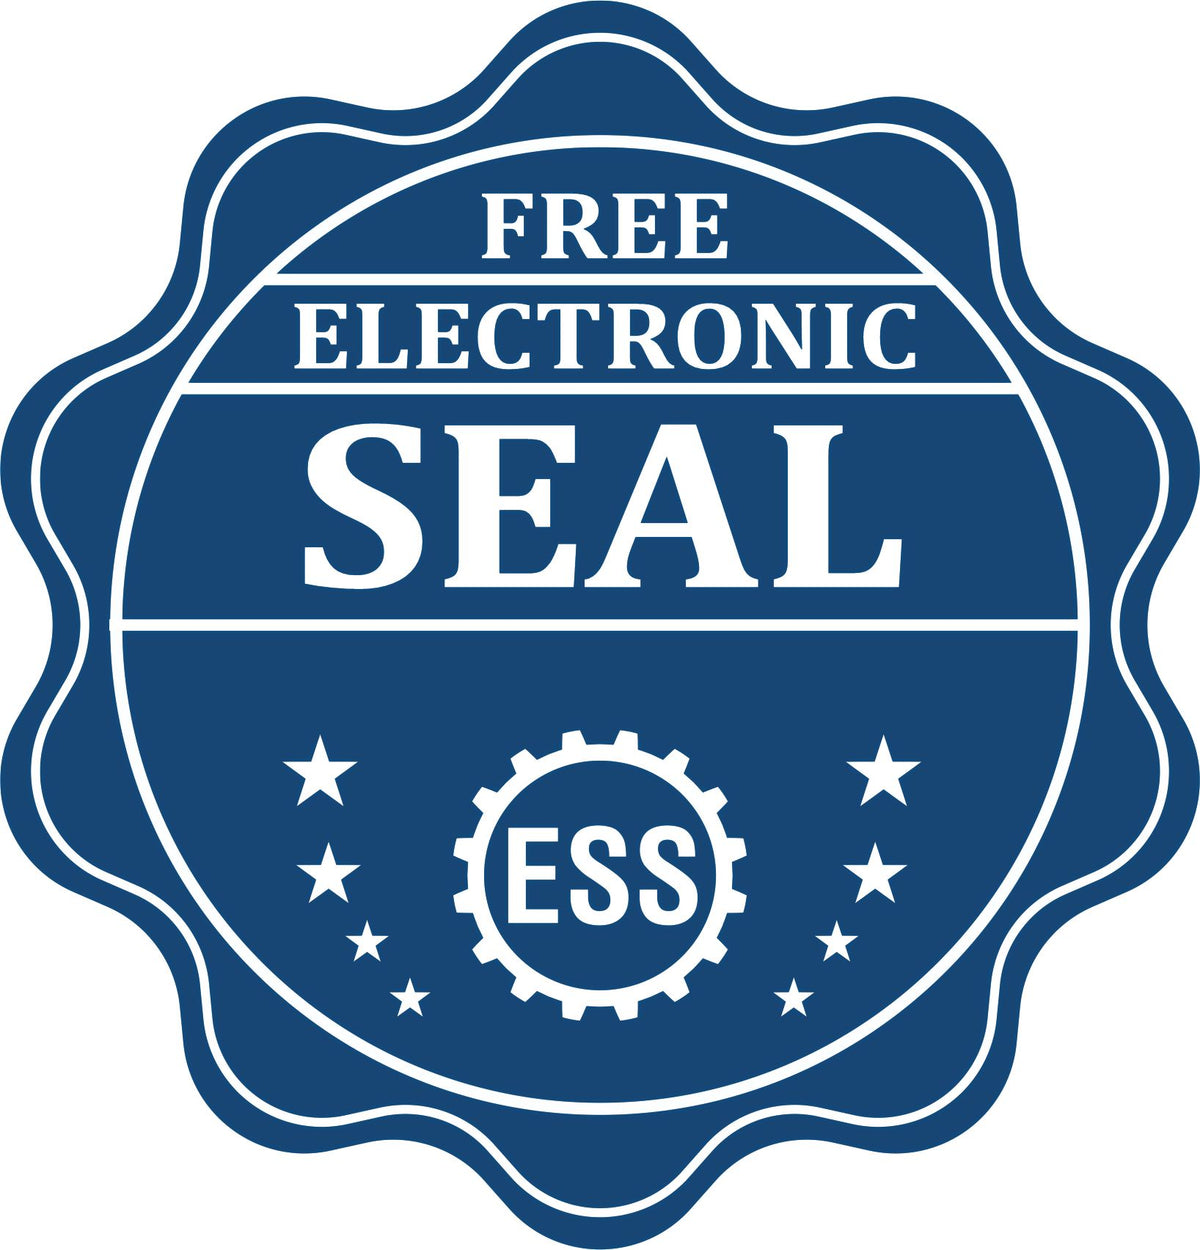 A badge showing a free electronic seal for the State of New Jersey Long Reach Architectural Embossing Seal with stars and the ESS gear on the emblem.